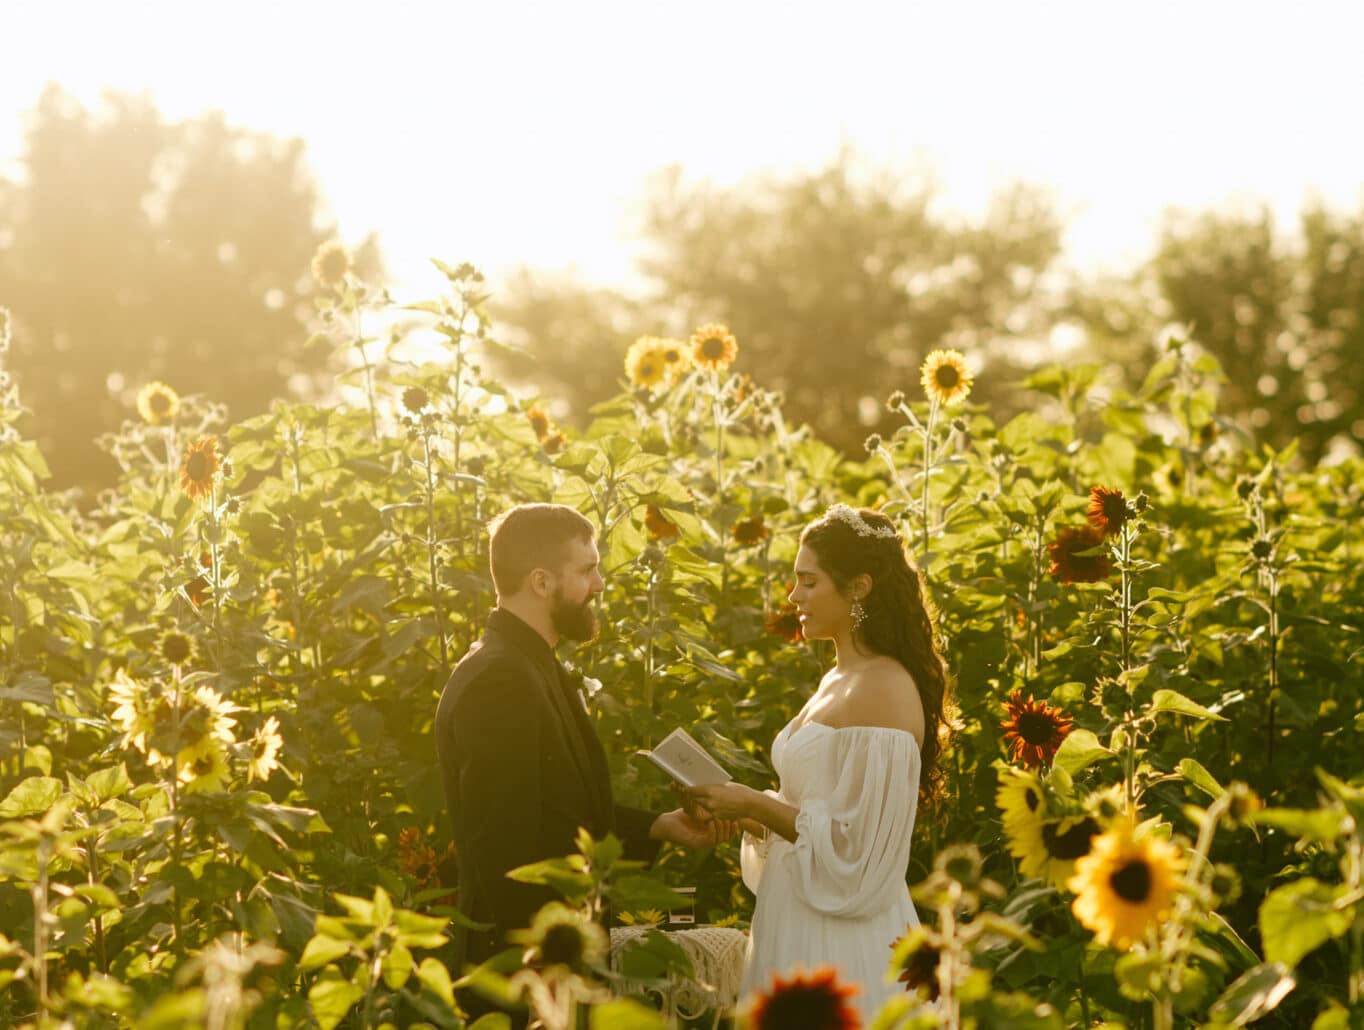 bride and groom stand in sunflower field at stanley pond adventure farm wedding reading their vows to each other